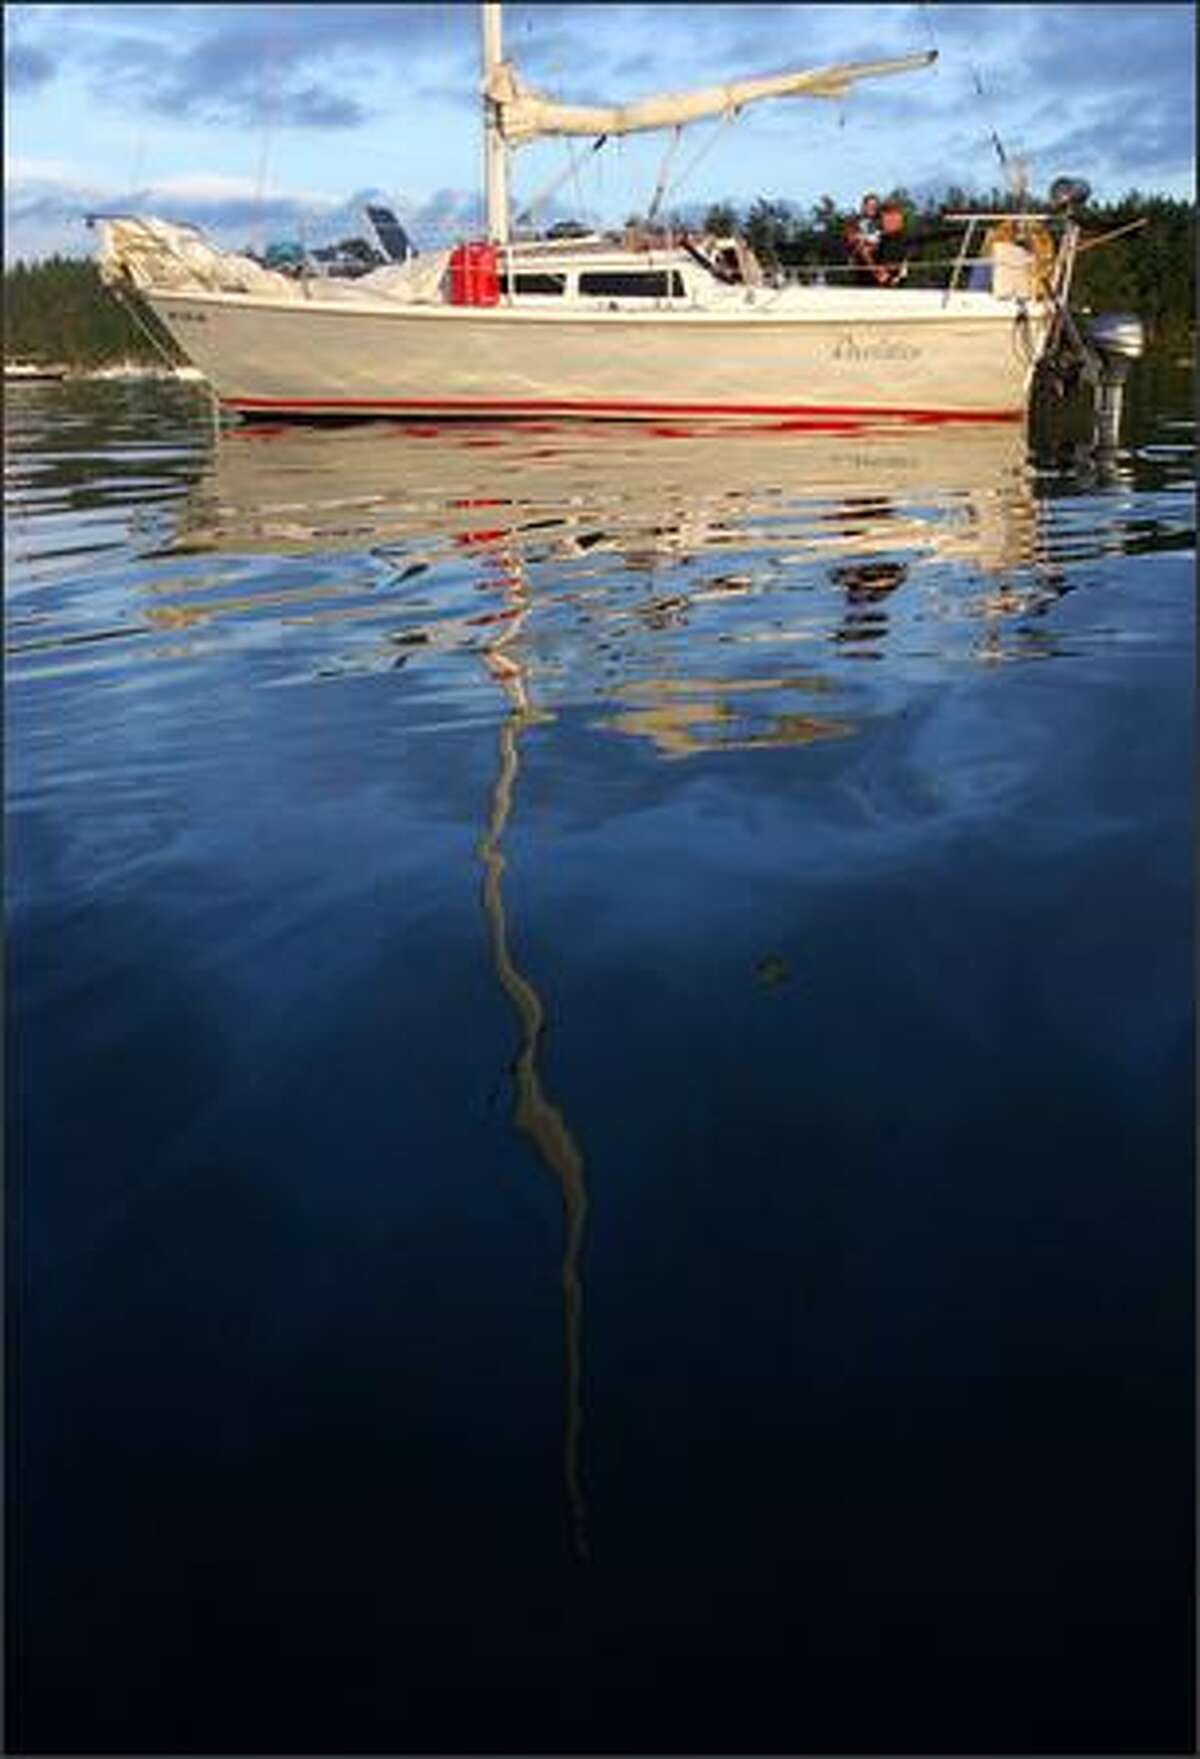 A sailboat at anchor in Roche Harbor, one of the few fuel and food stops for boats in the northern San Juan Islands.